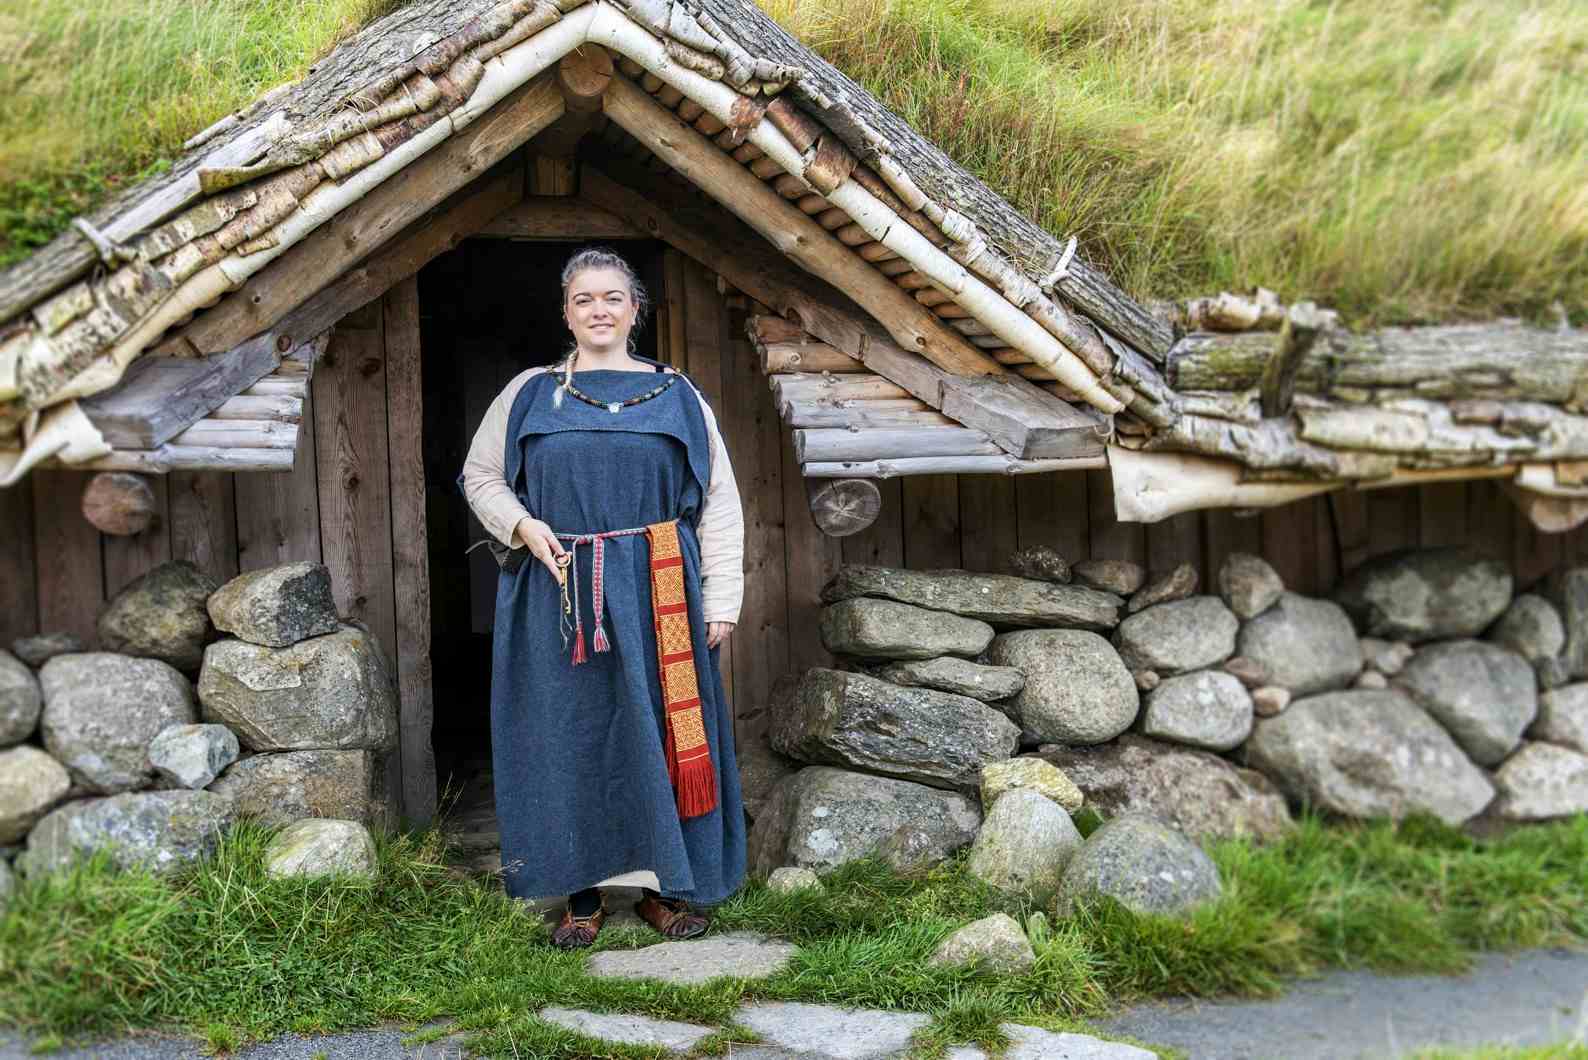 Woman standing in the doorway of a longhouse from the iron age. Dressed in period clothing.